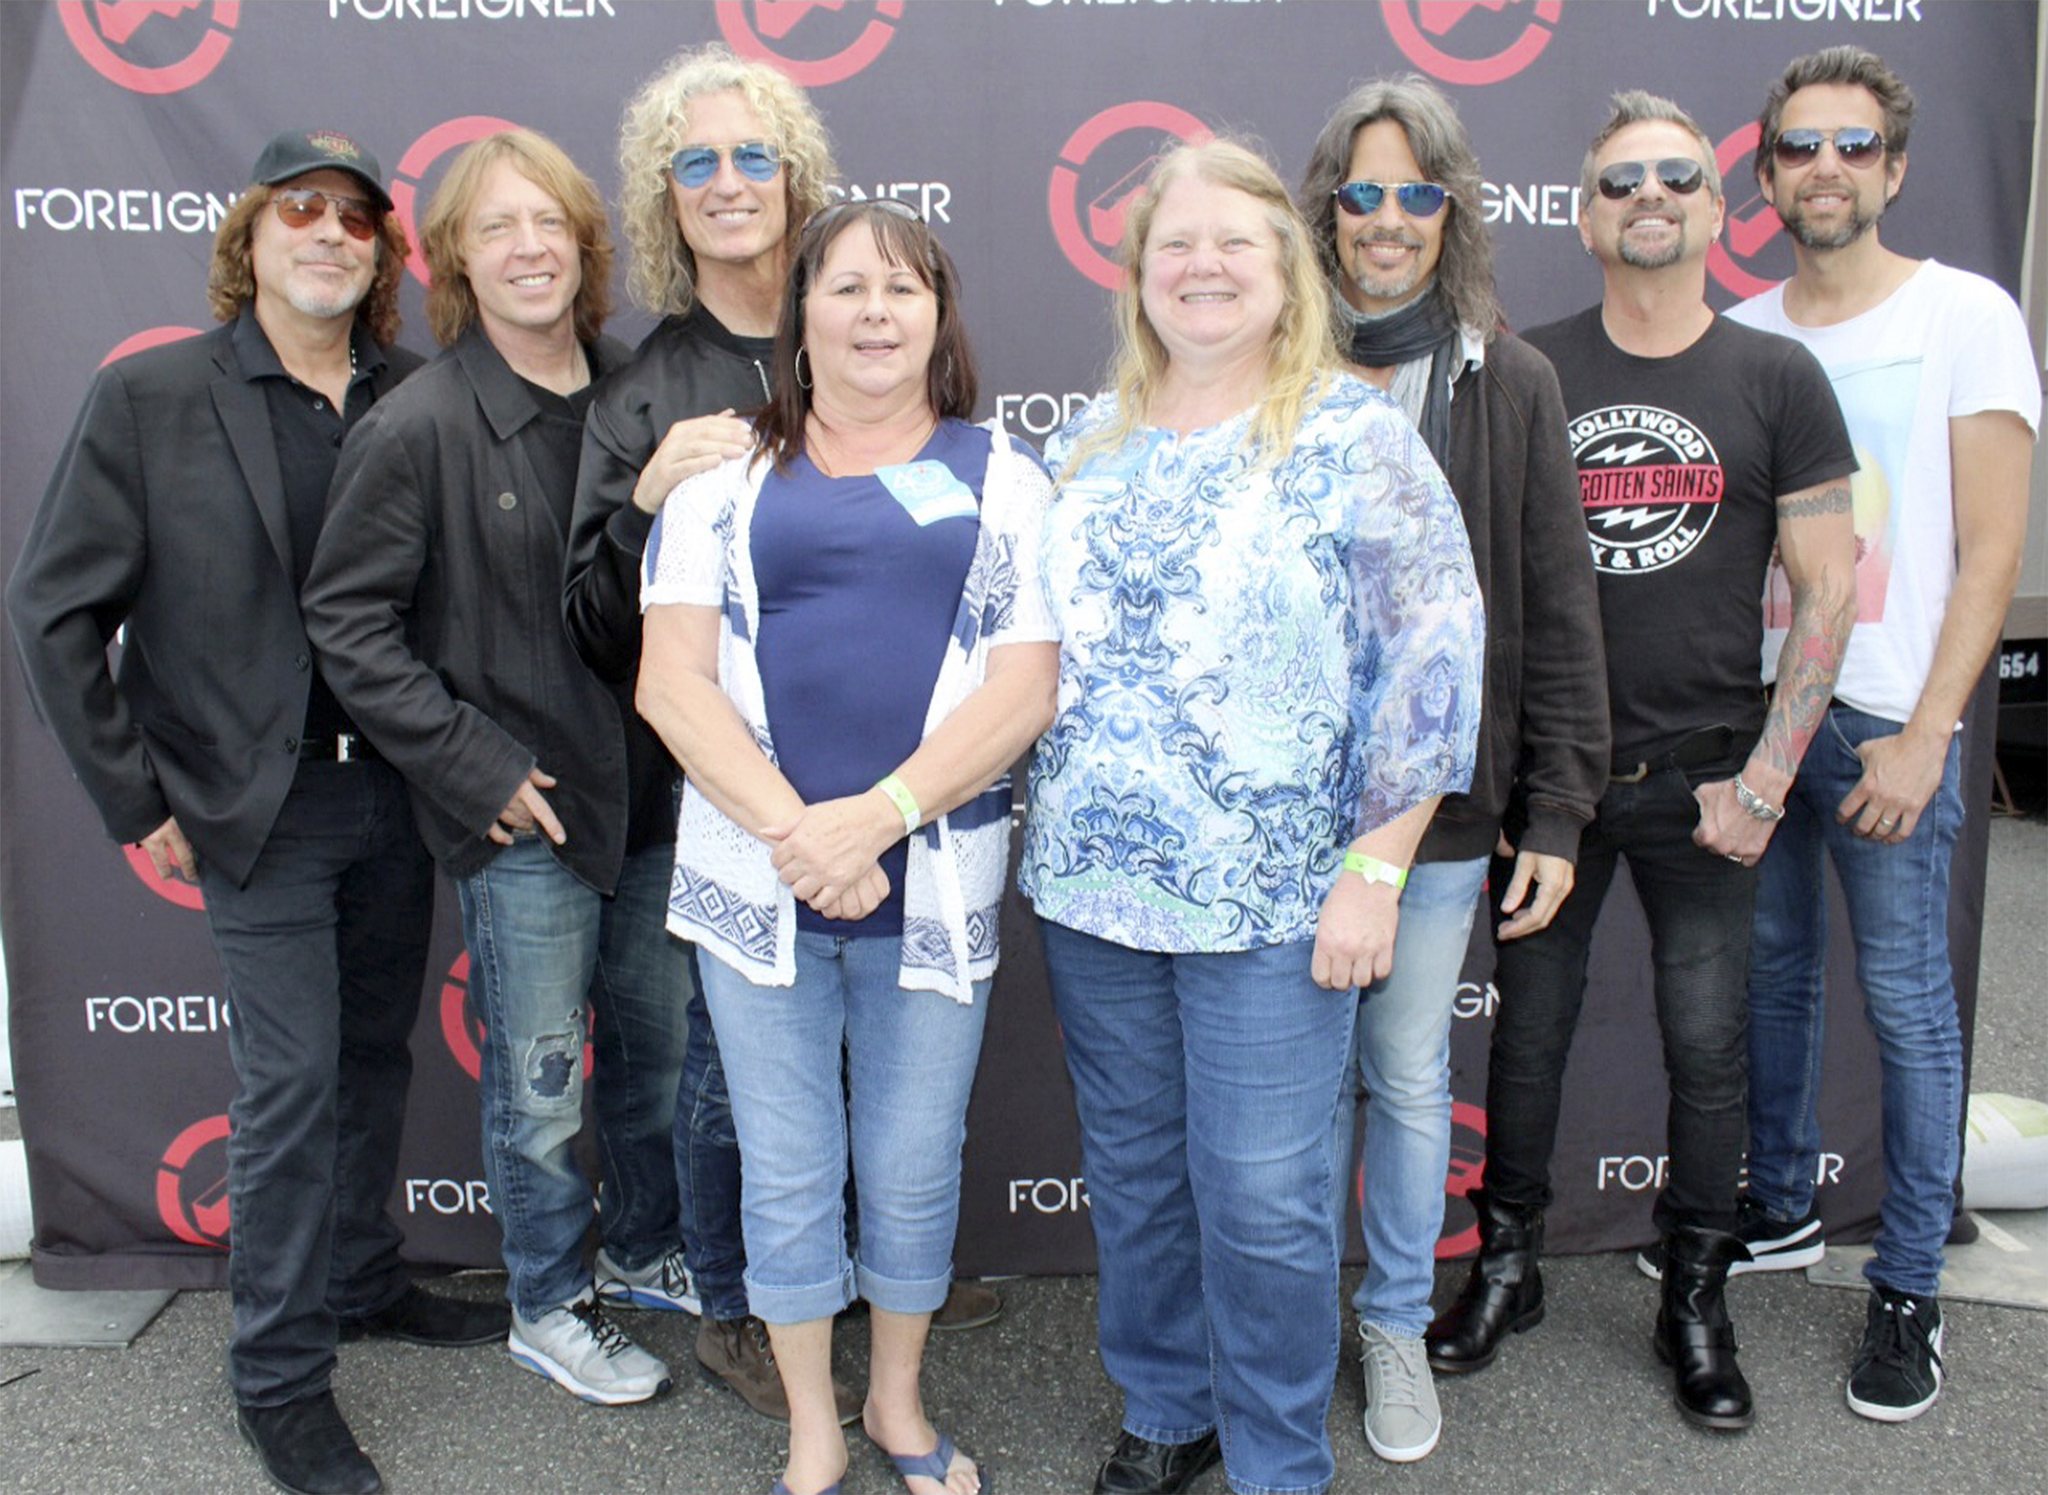 Arlene Klemme of Marysville and Barbara Roy of Arlington pose with the band Foreigner at Tulalip Friday night after winning the grand-prize drawing for meet-and-greet tickets